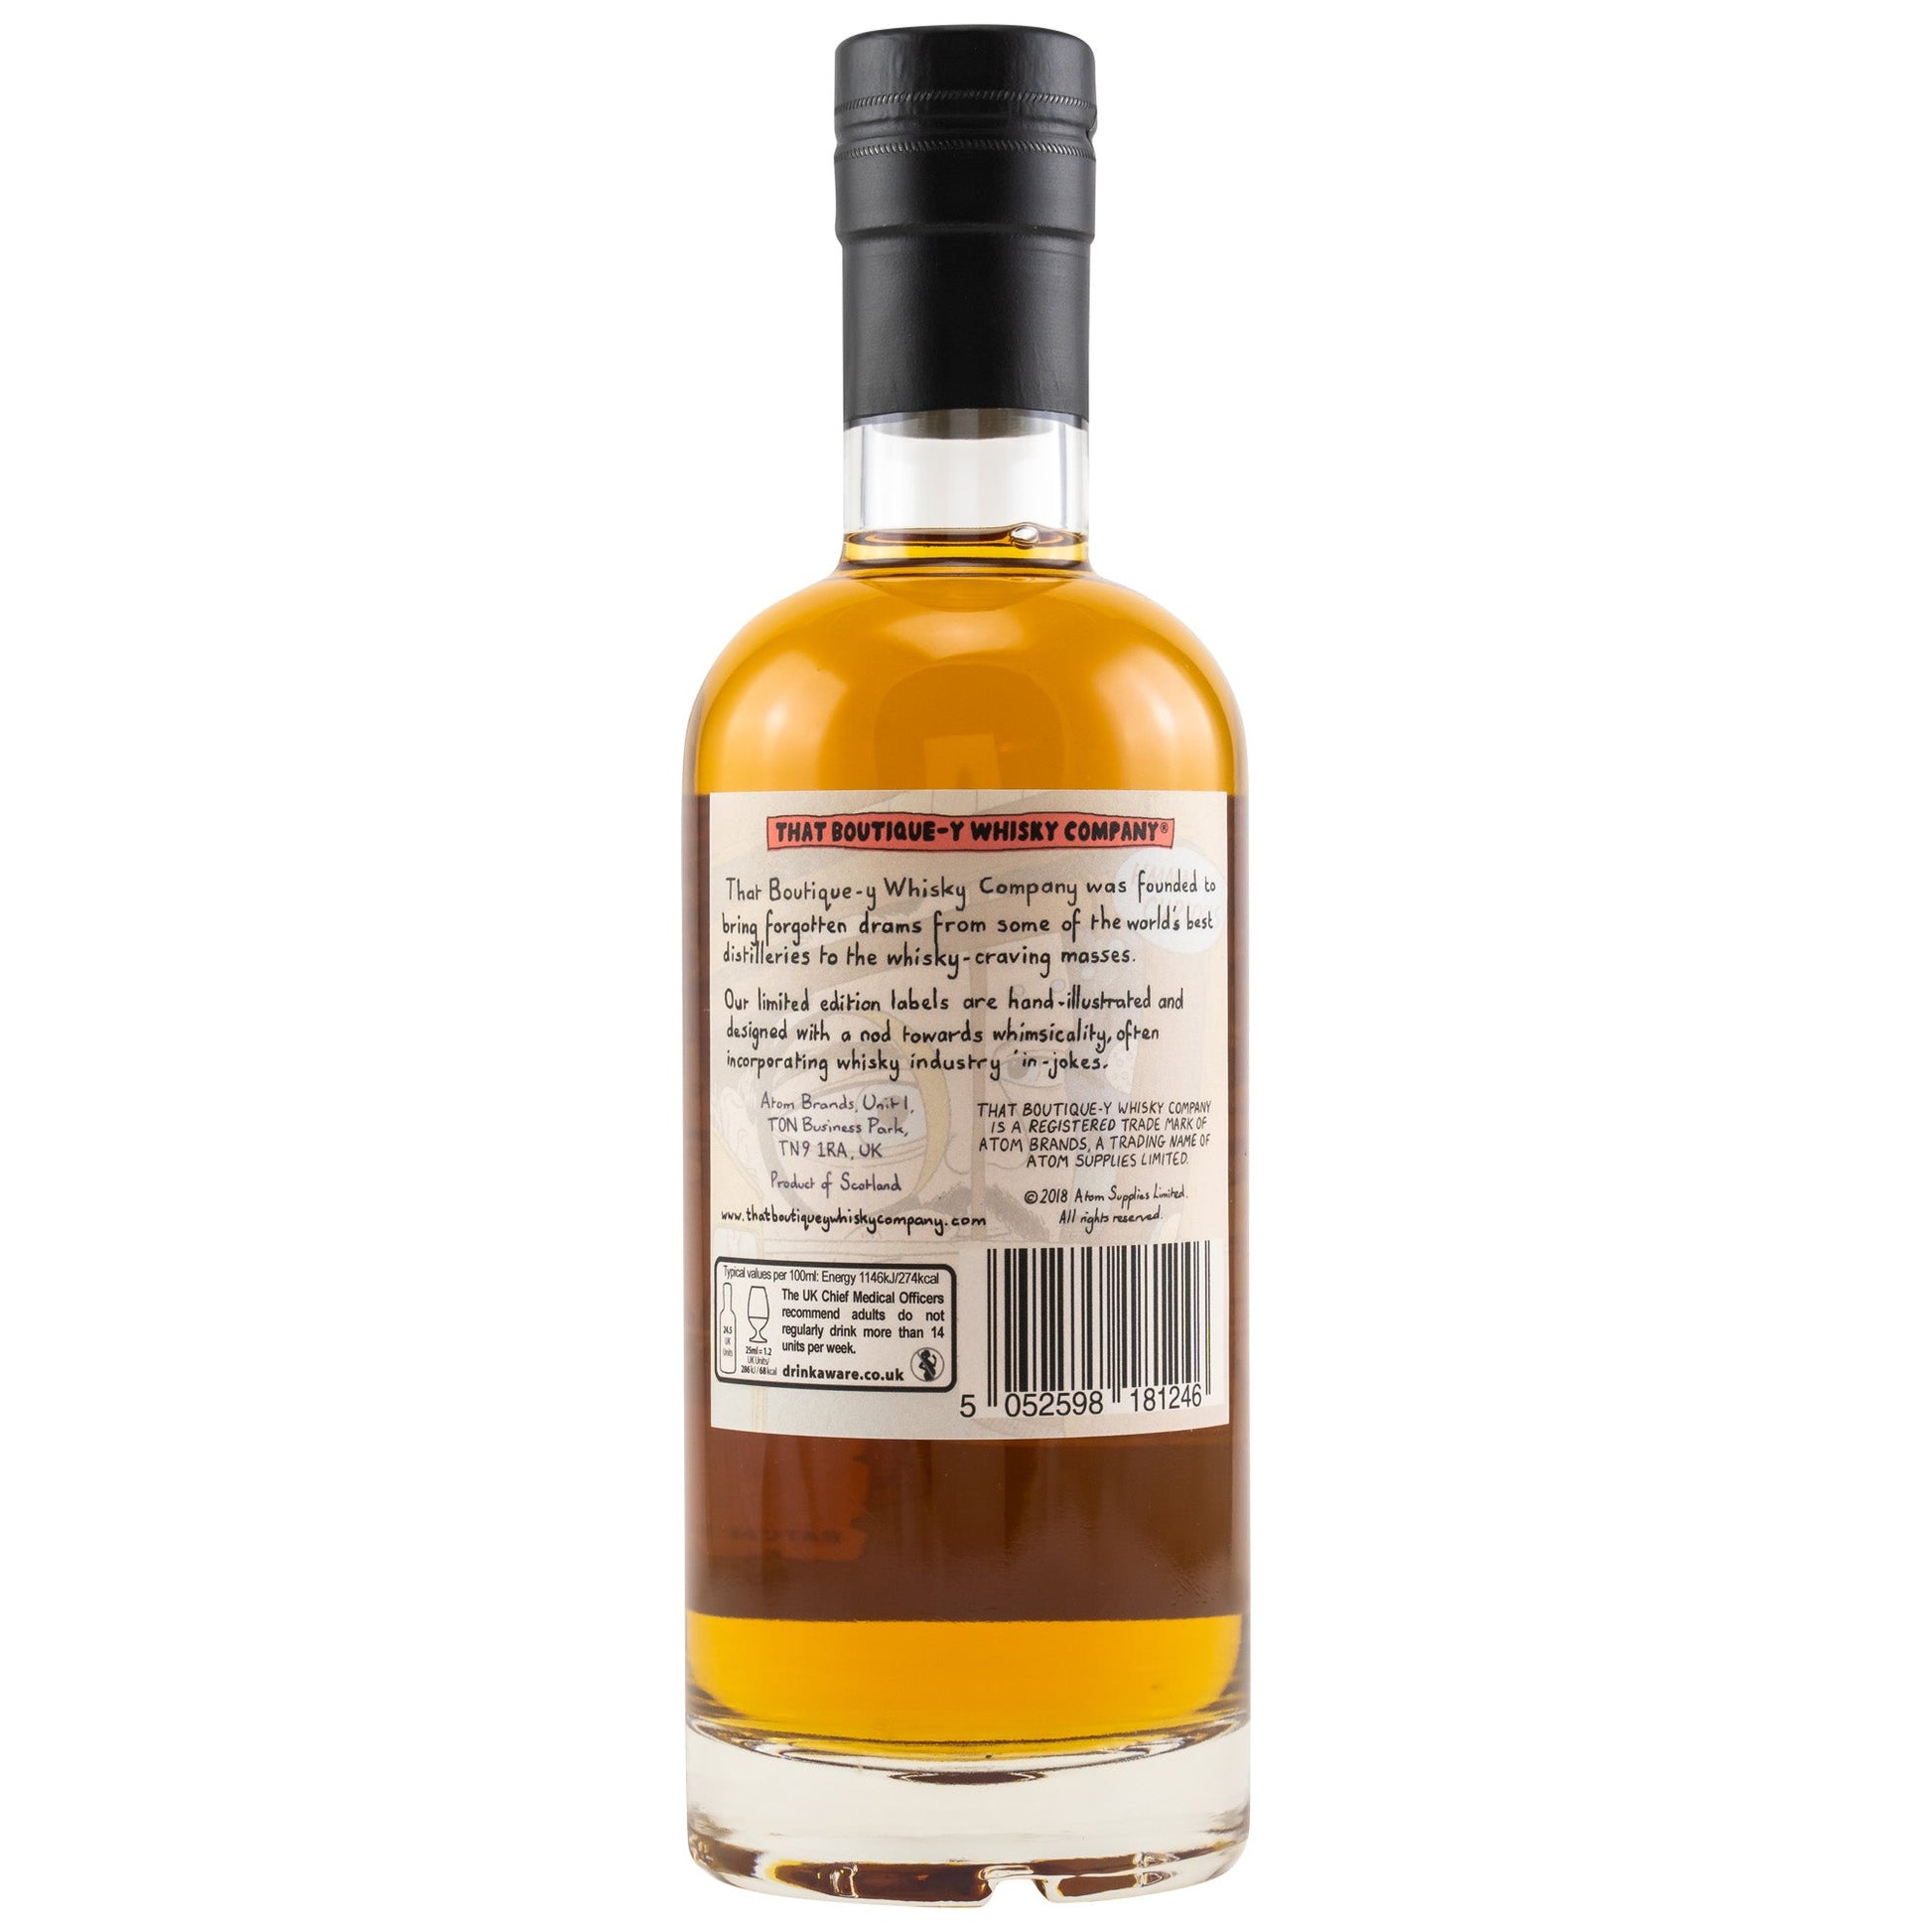 The Macallan | 24 Jahre | Batch 21 | That Boutique-y Whisky Company | 0,5l | 48,9%GET A BOTTLE